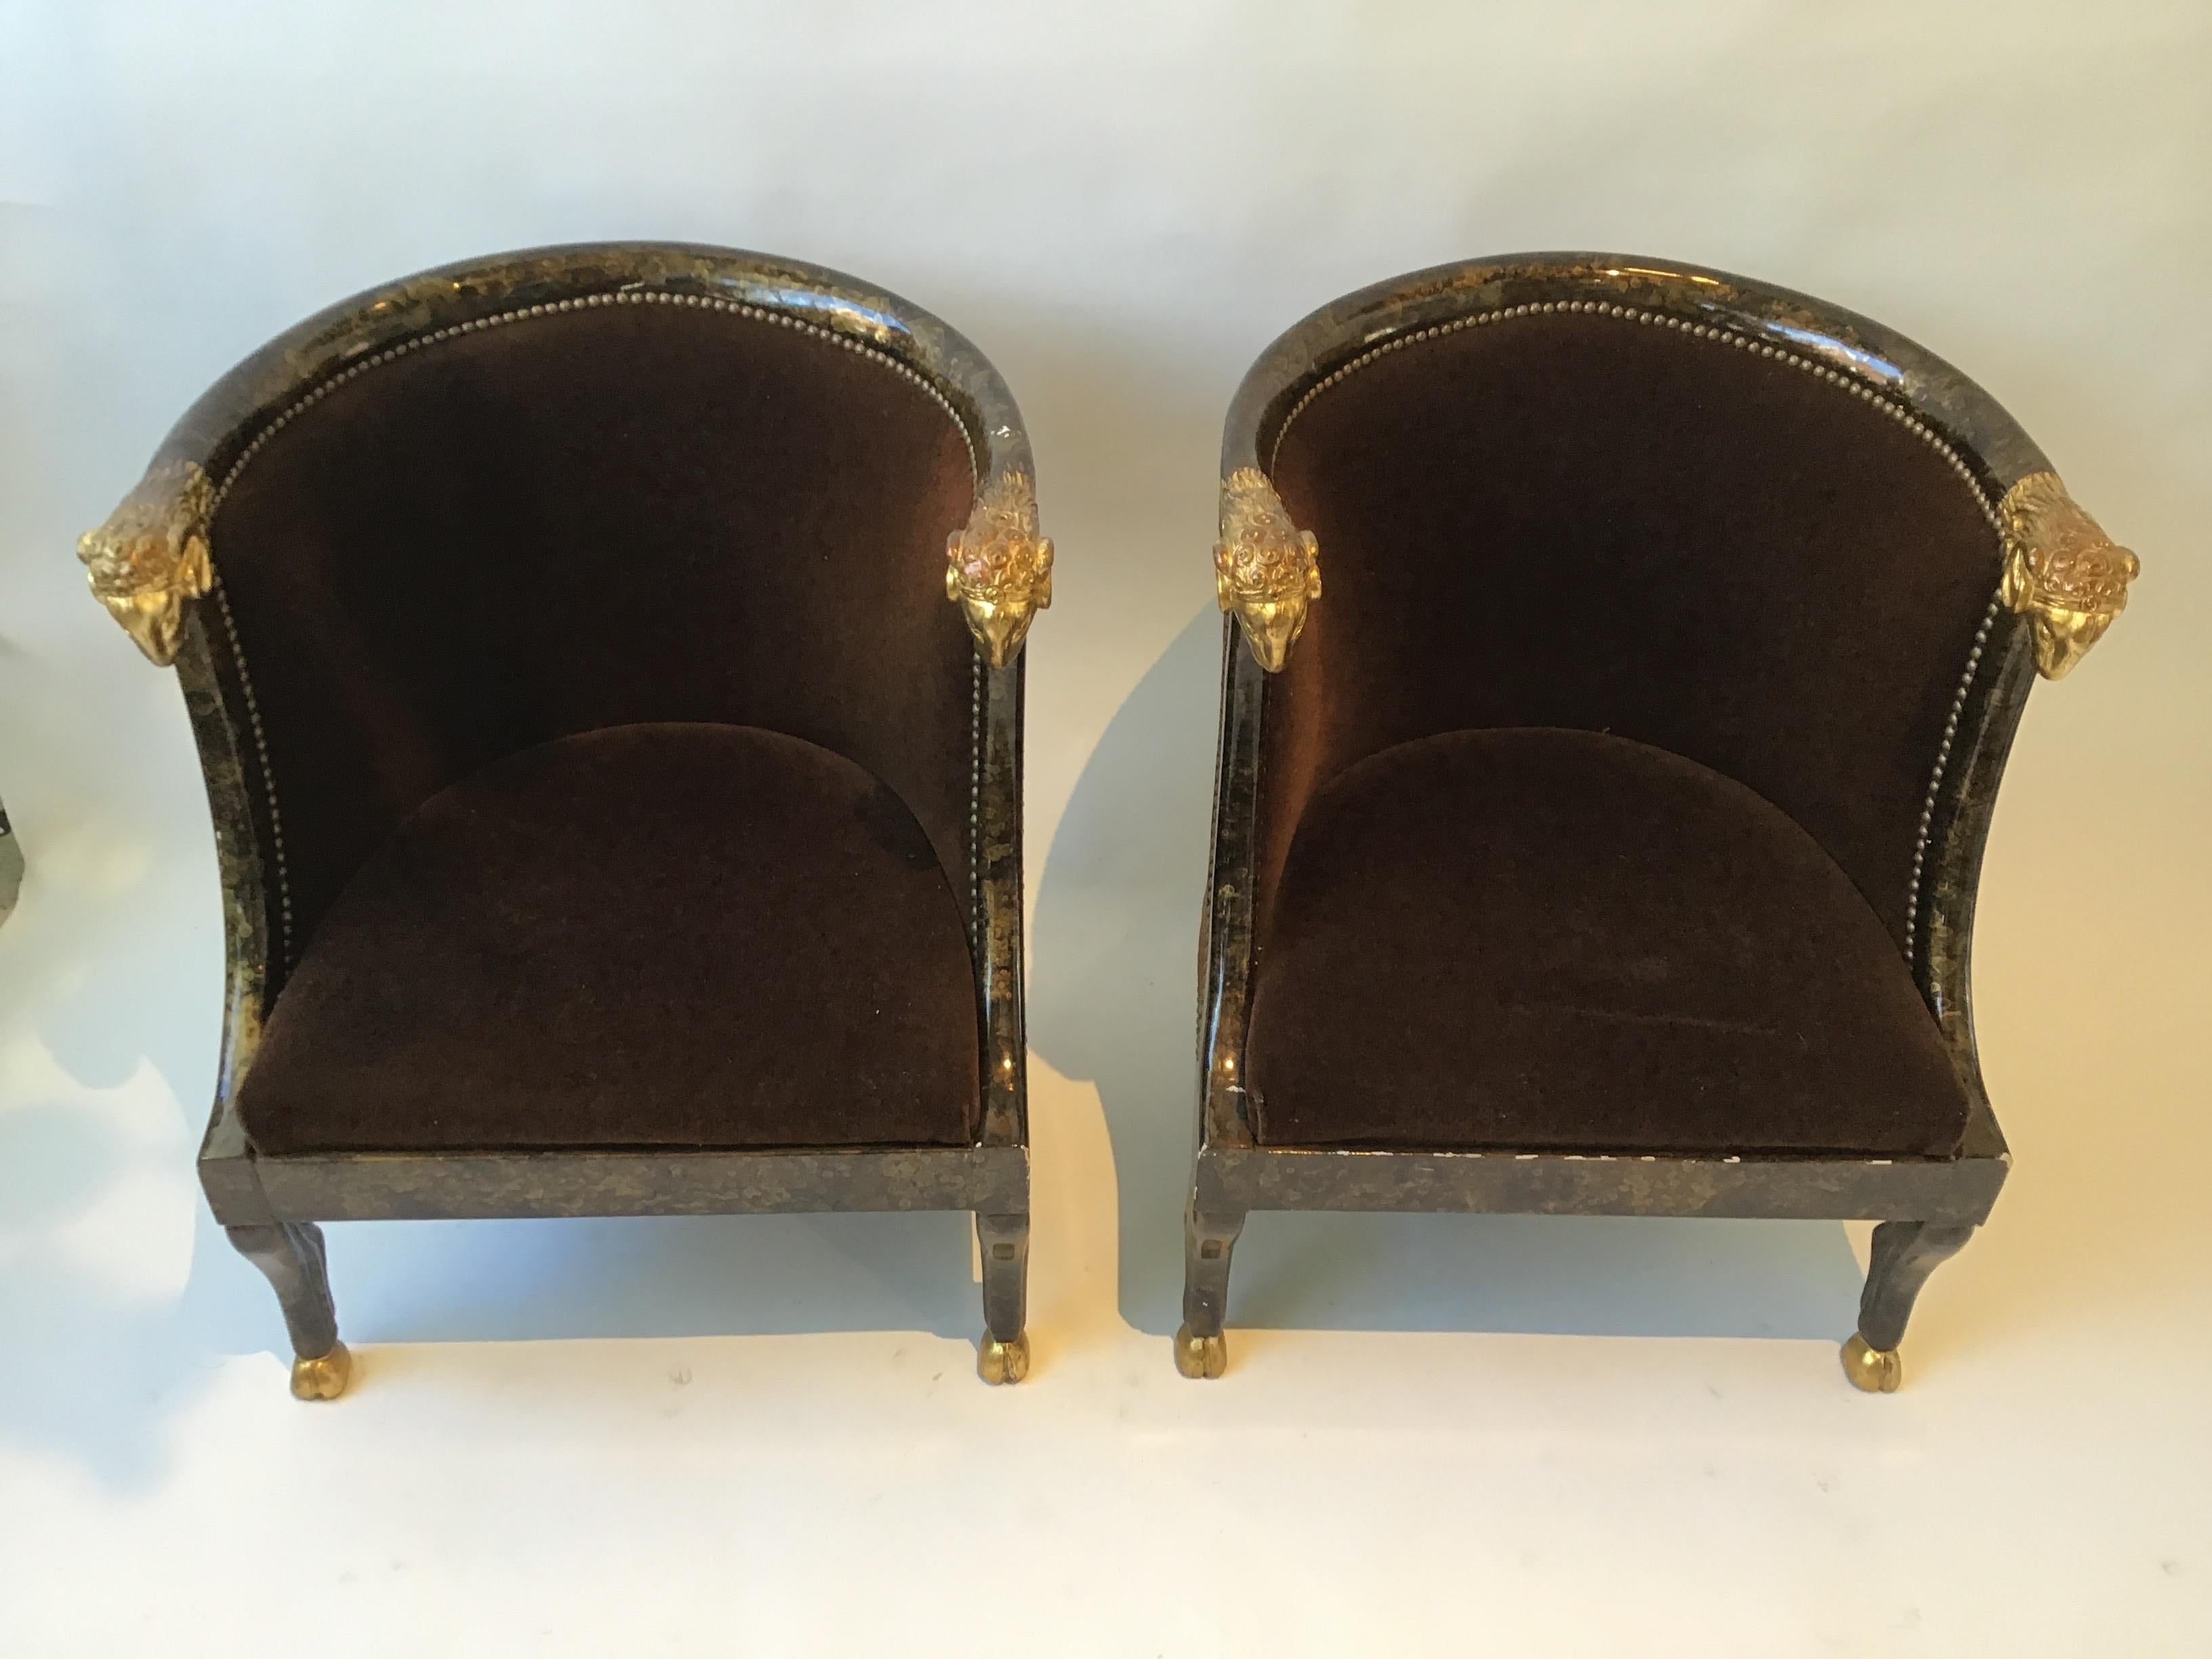 Pair of 1980s carved wood rams head tub chairs. Gilt rams head and feet. Faux painted finish to frame. Some chipping in finish. Brown velvet is about 10 years old.